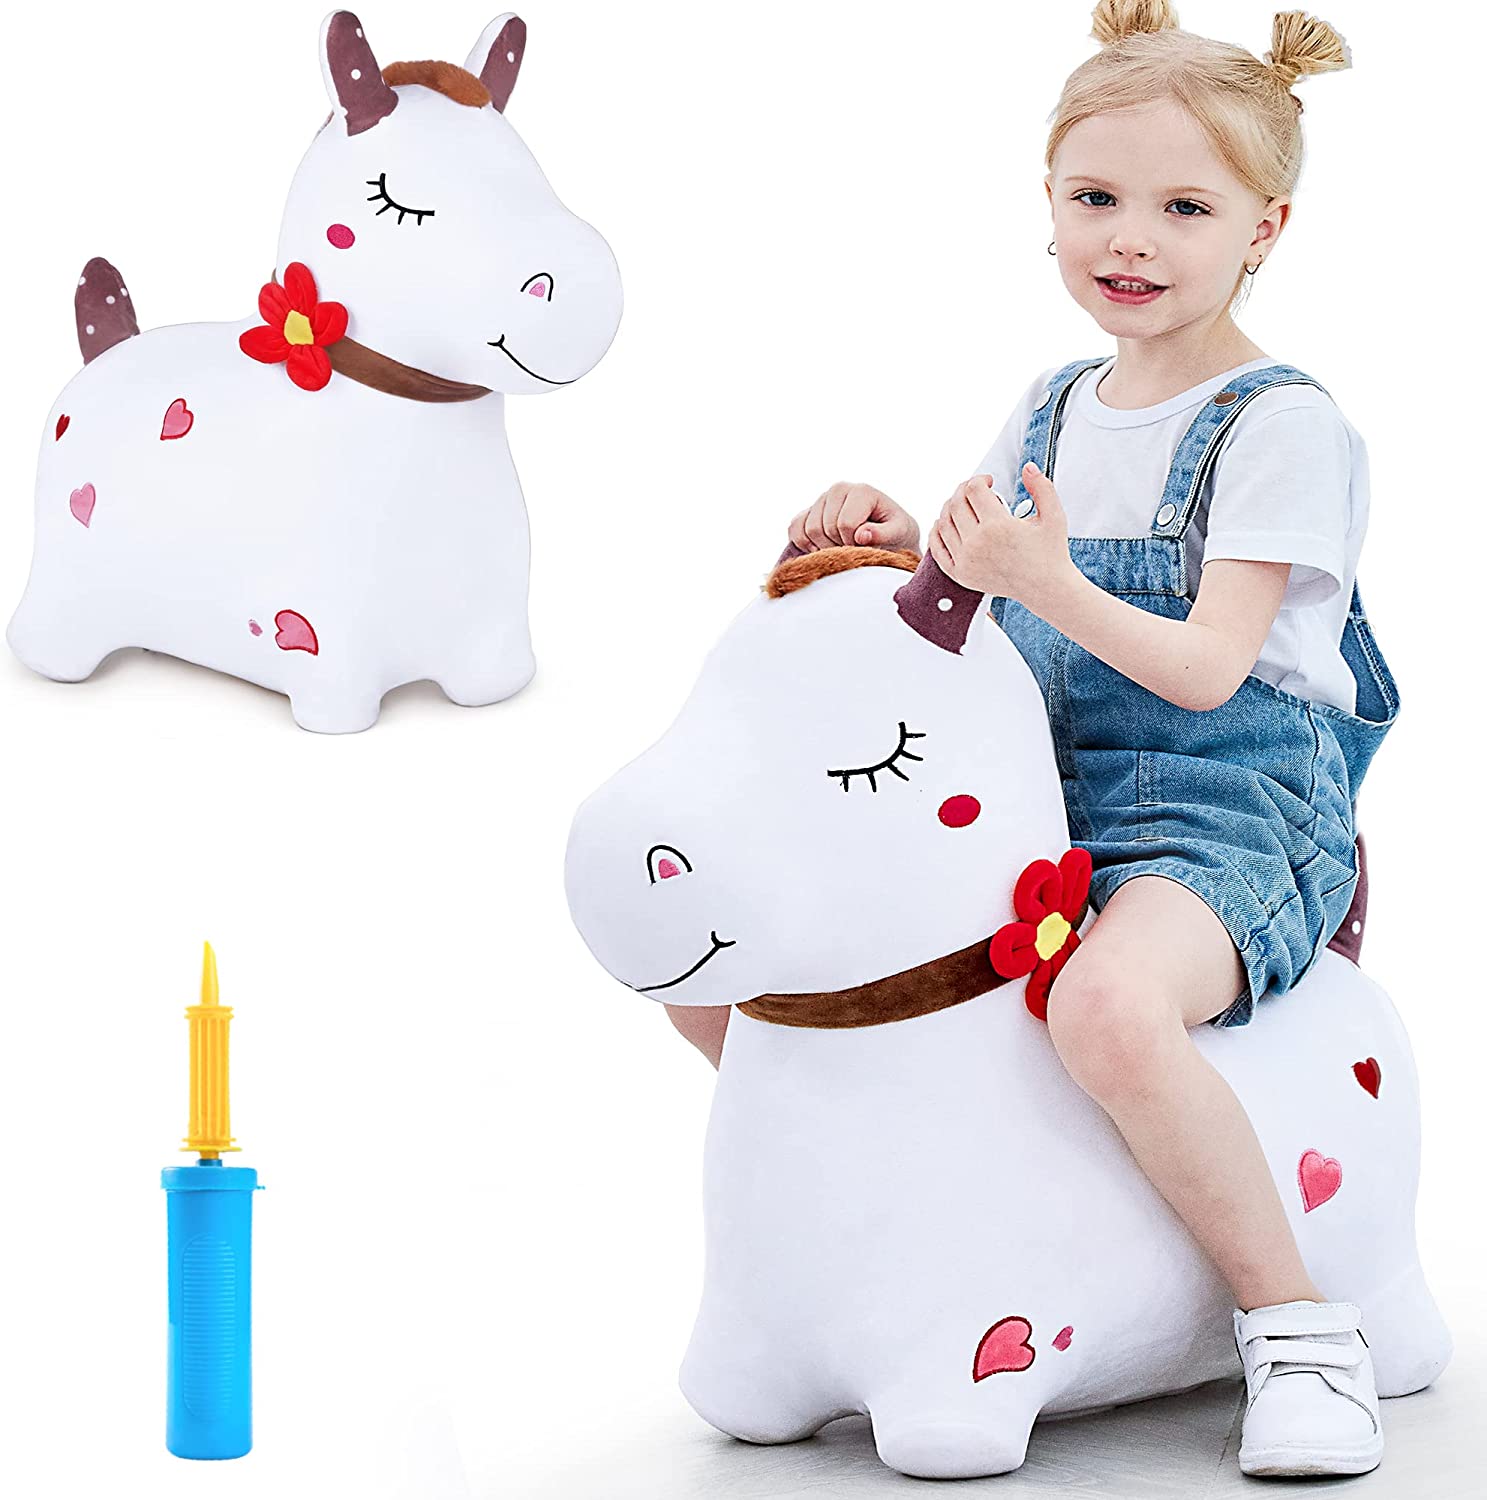 4 2 Year Olds Kids Toddlers Girl （W/ Pump） 3 Brand Registry Unicorn Bouncy Horse Plush,Bouncy Unicorn Hopper,Jumping Horse,Outdoor&Indoor Bouncy Animals for.for 18 Months 